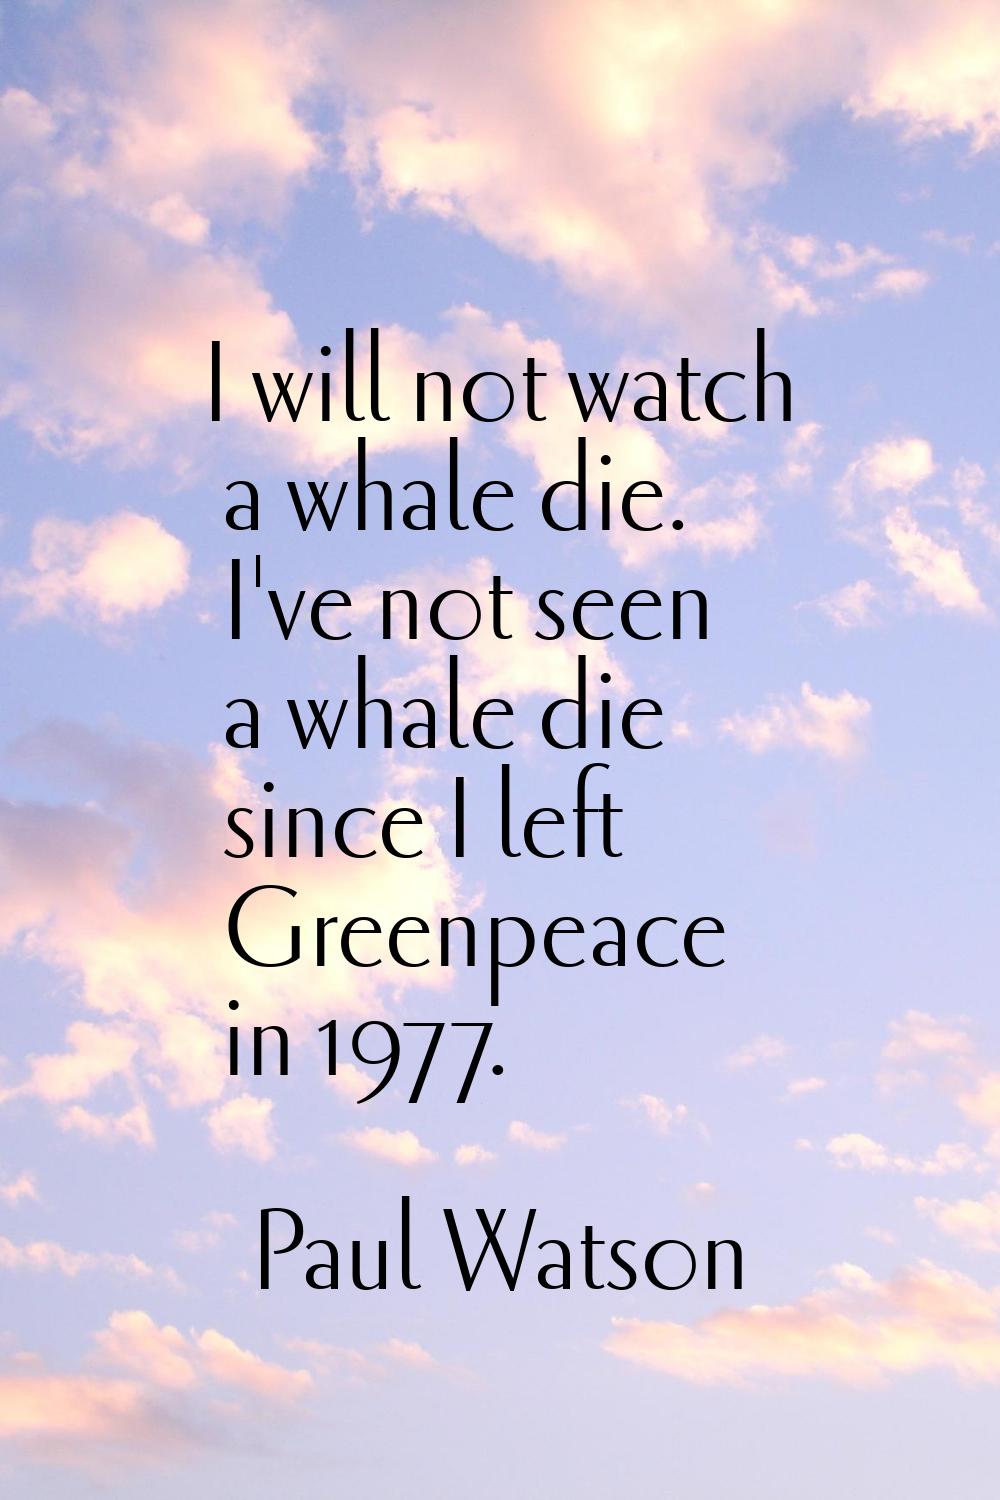 I will not watch a whale die. I've not seen a whale die since I left Greenpeace in 1977.